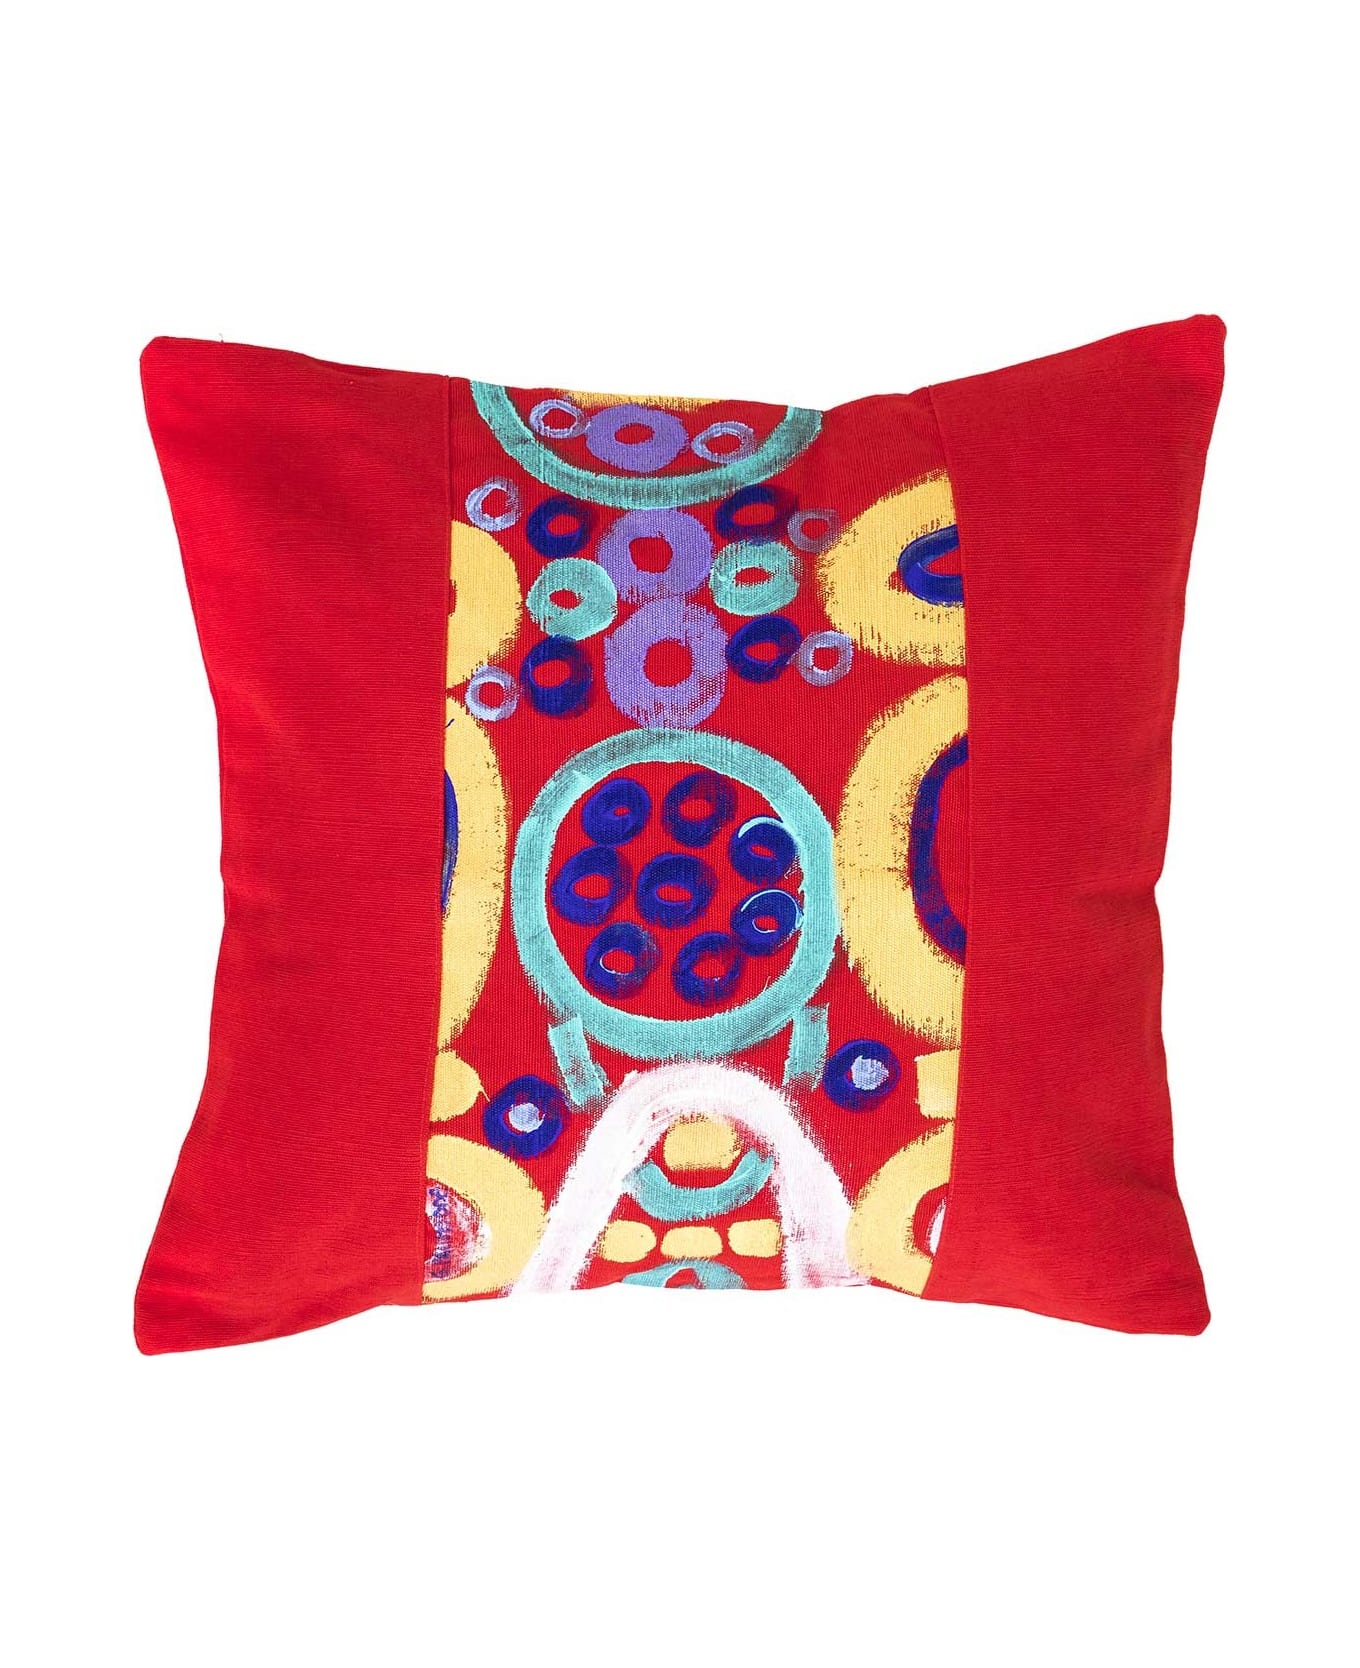 Le Botteghe su Gologone Acrylic Hand Painted Outdoor Cushion 40x40 cm - Red Fantasy